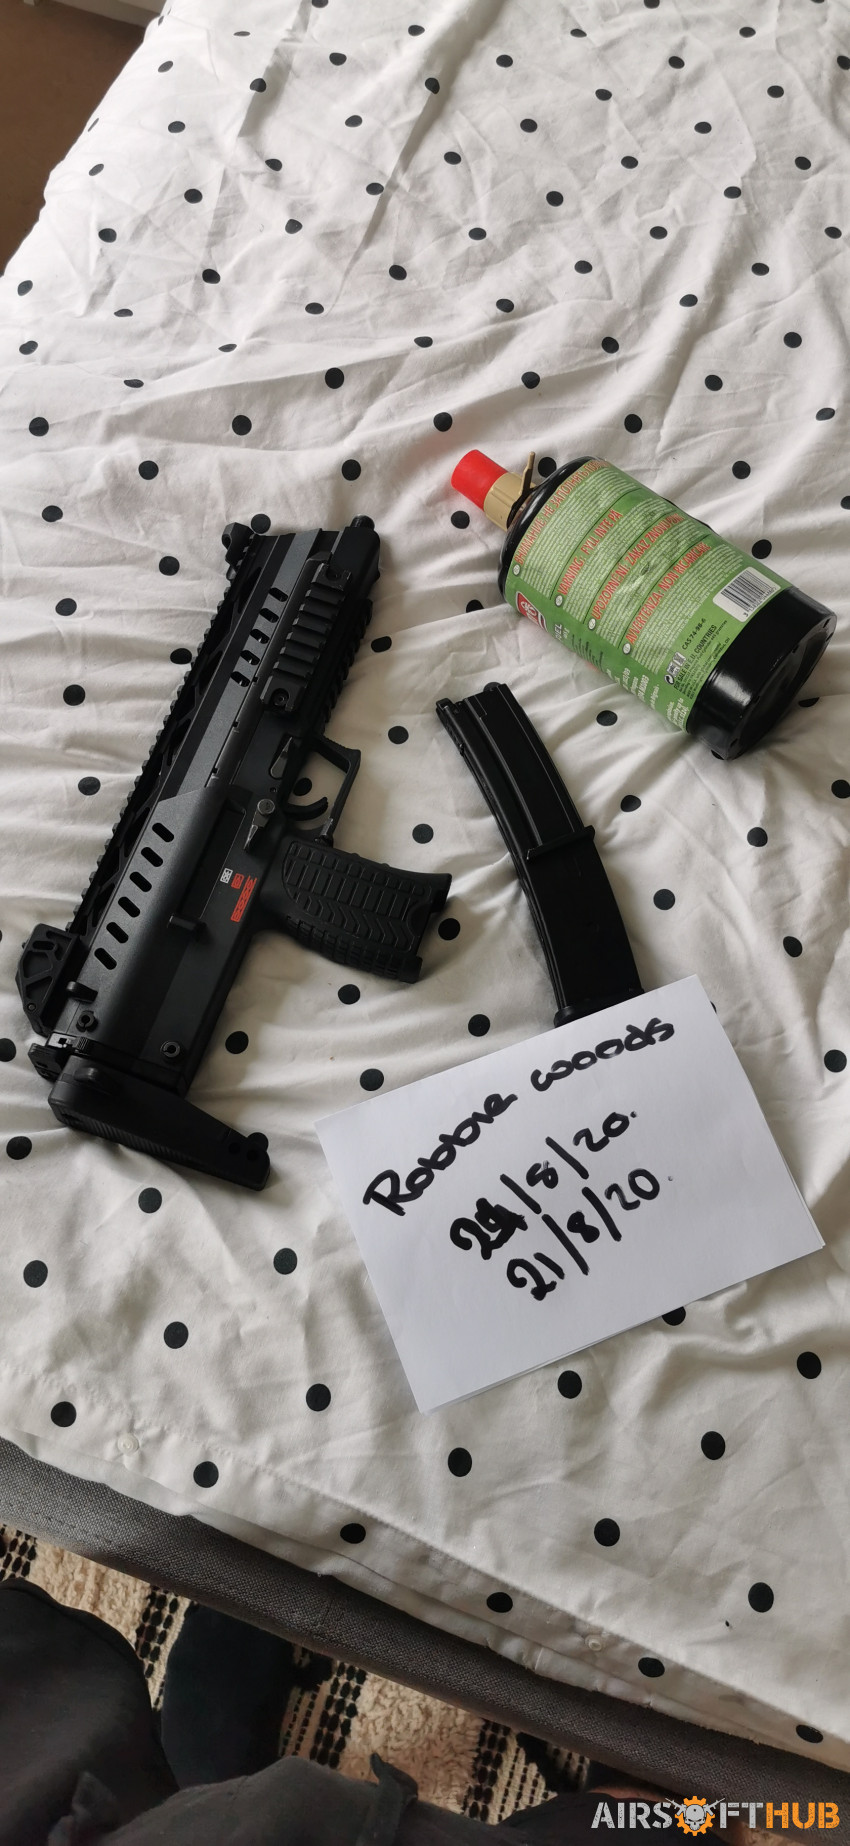 We Smg8 gbb - Used airsoft equipment